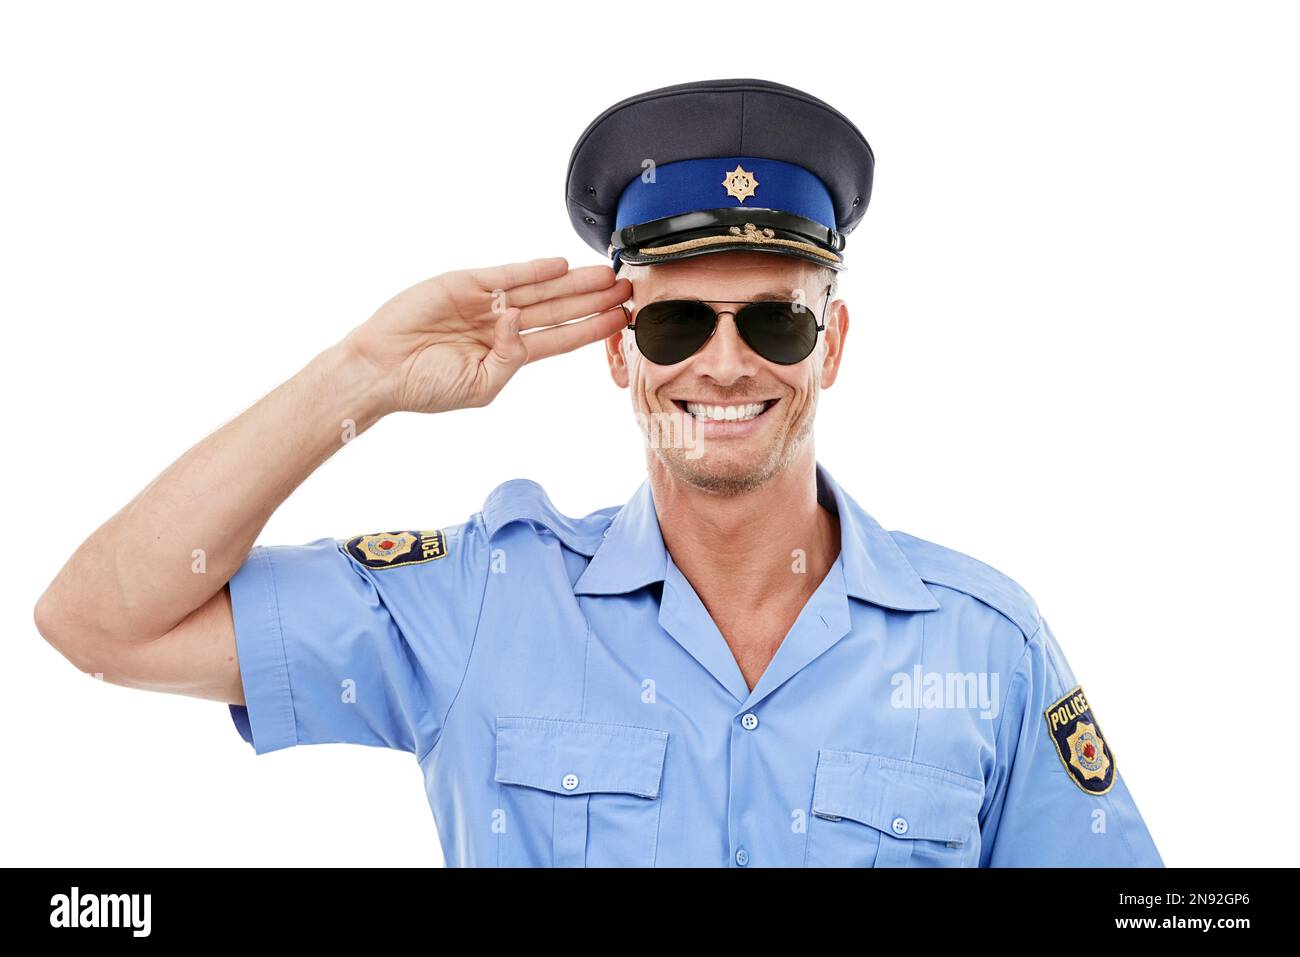 Security, salute and face of police smile on white background for authority, public safety and service. Community justice, law enforcement and Stock Photo